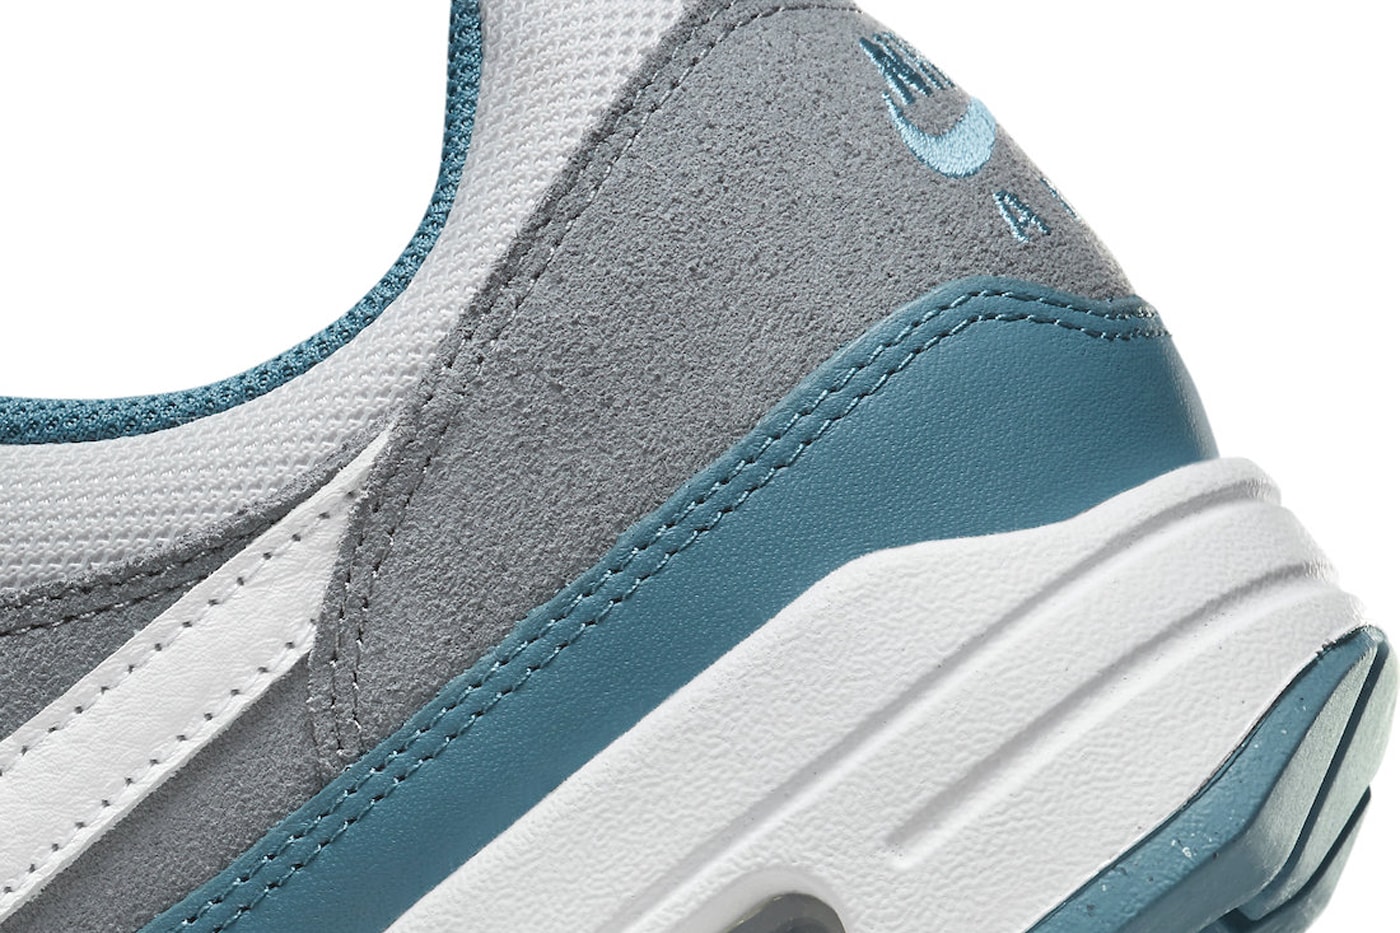 Nike Air Max 1 SC "Noise Aqua" Has an Official Fall Release Date FB9660-001 Photon Dust/White-Cool Grey-Noise Aqua october 20223 swoosh sneakers